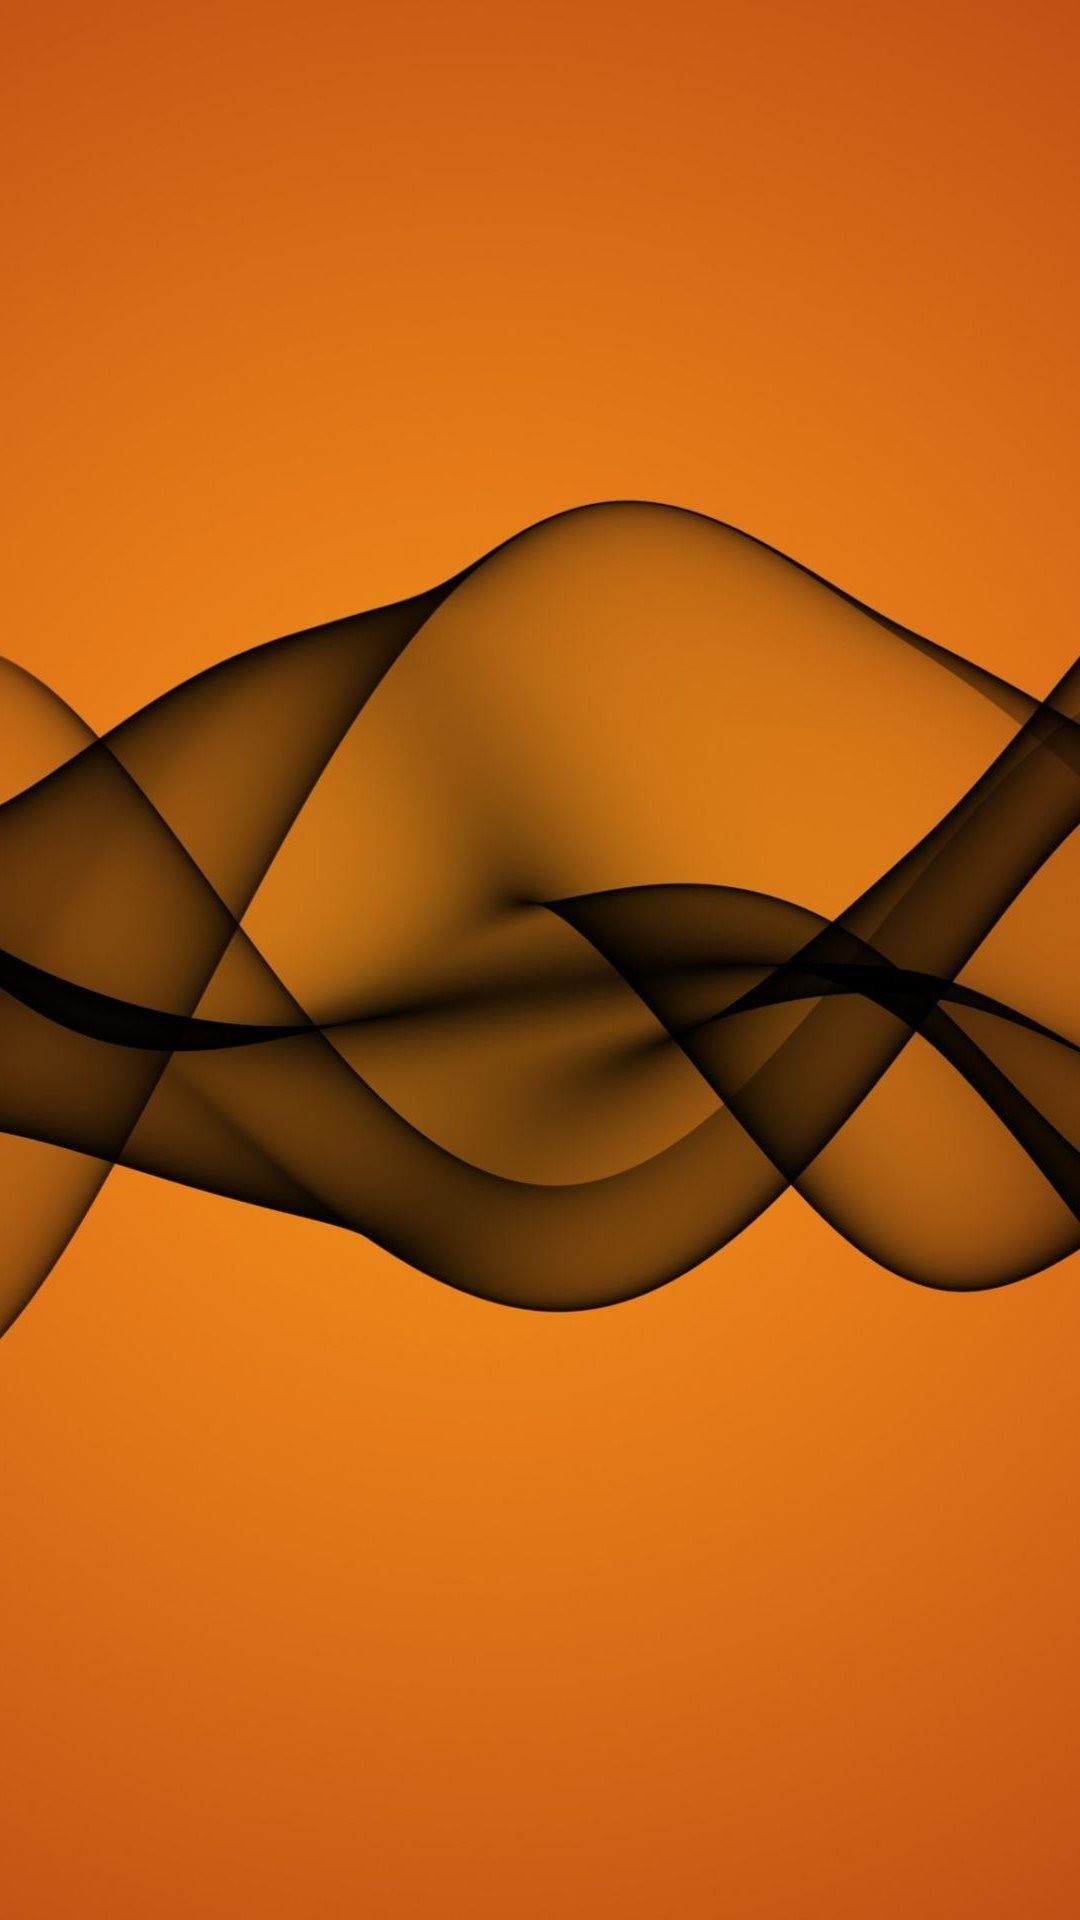 1080x1920 Abstract Black Shape Orange Background Android Wallpaper ...